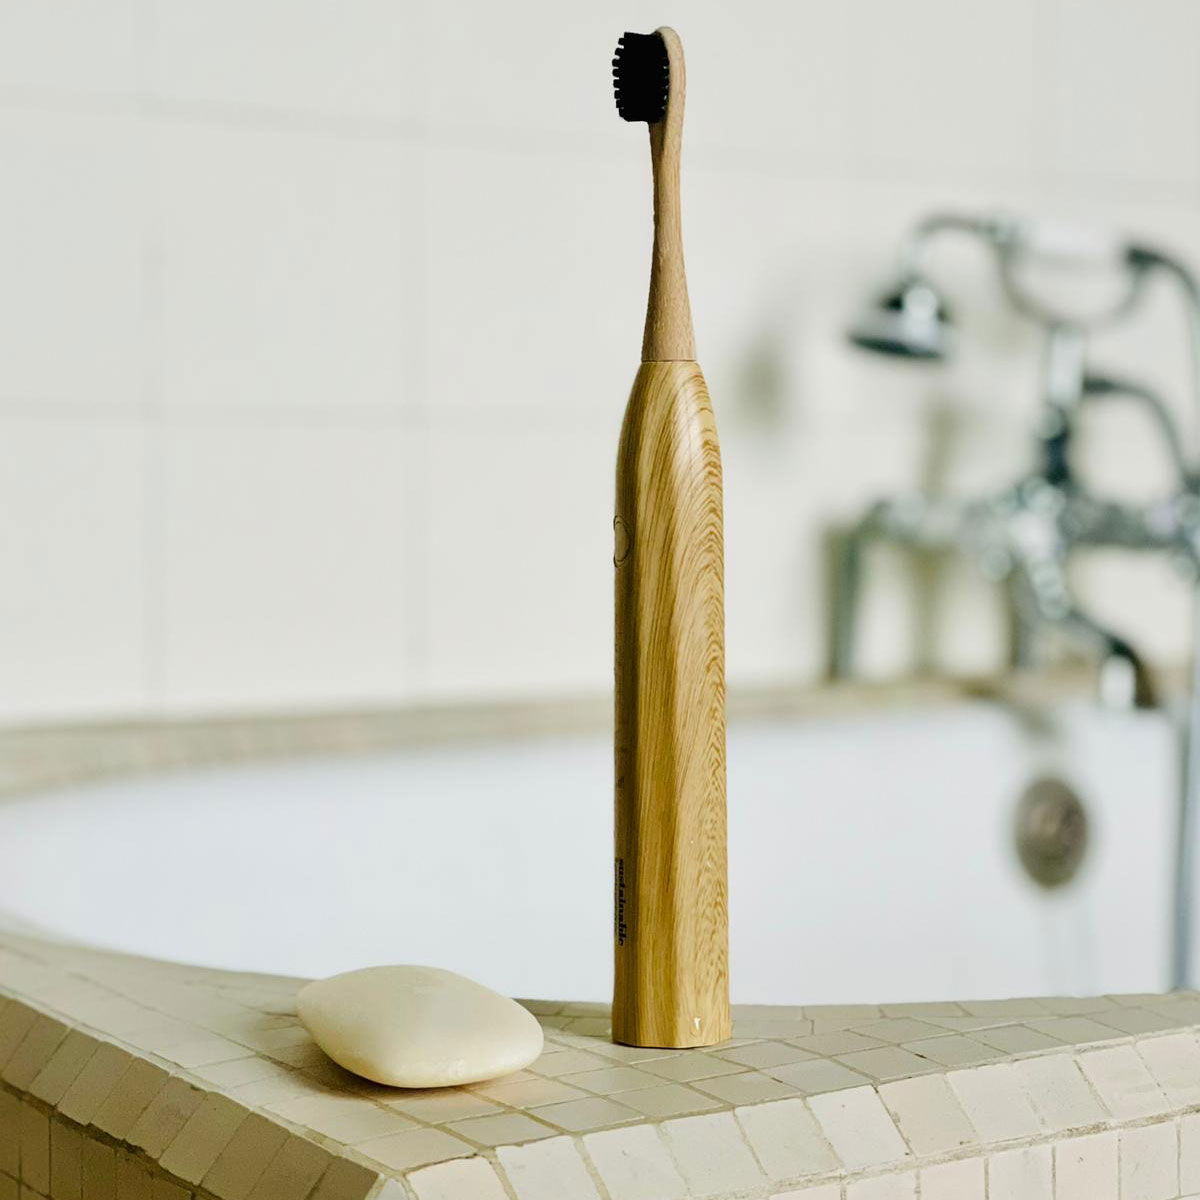 Sustainable tomorrow Zen bamboo electric toothbrush in a bathroom